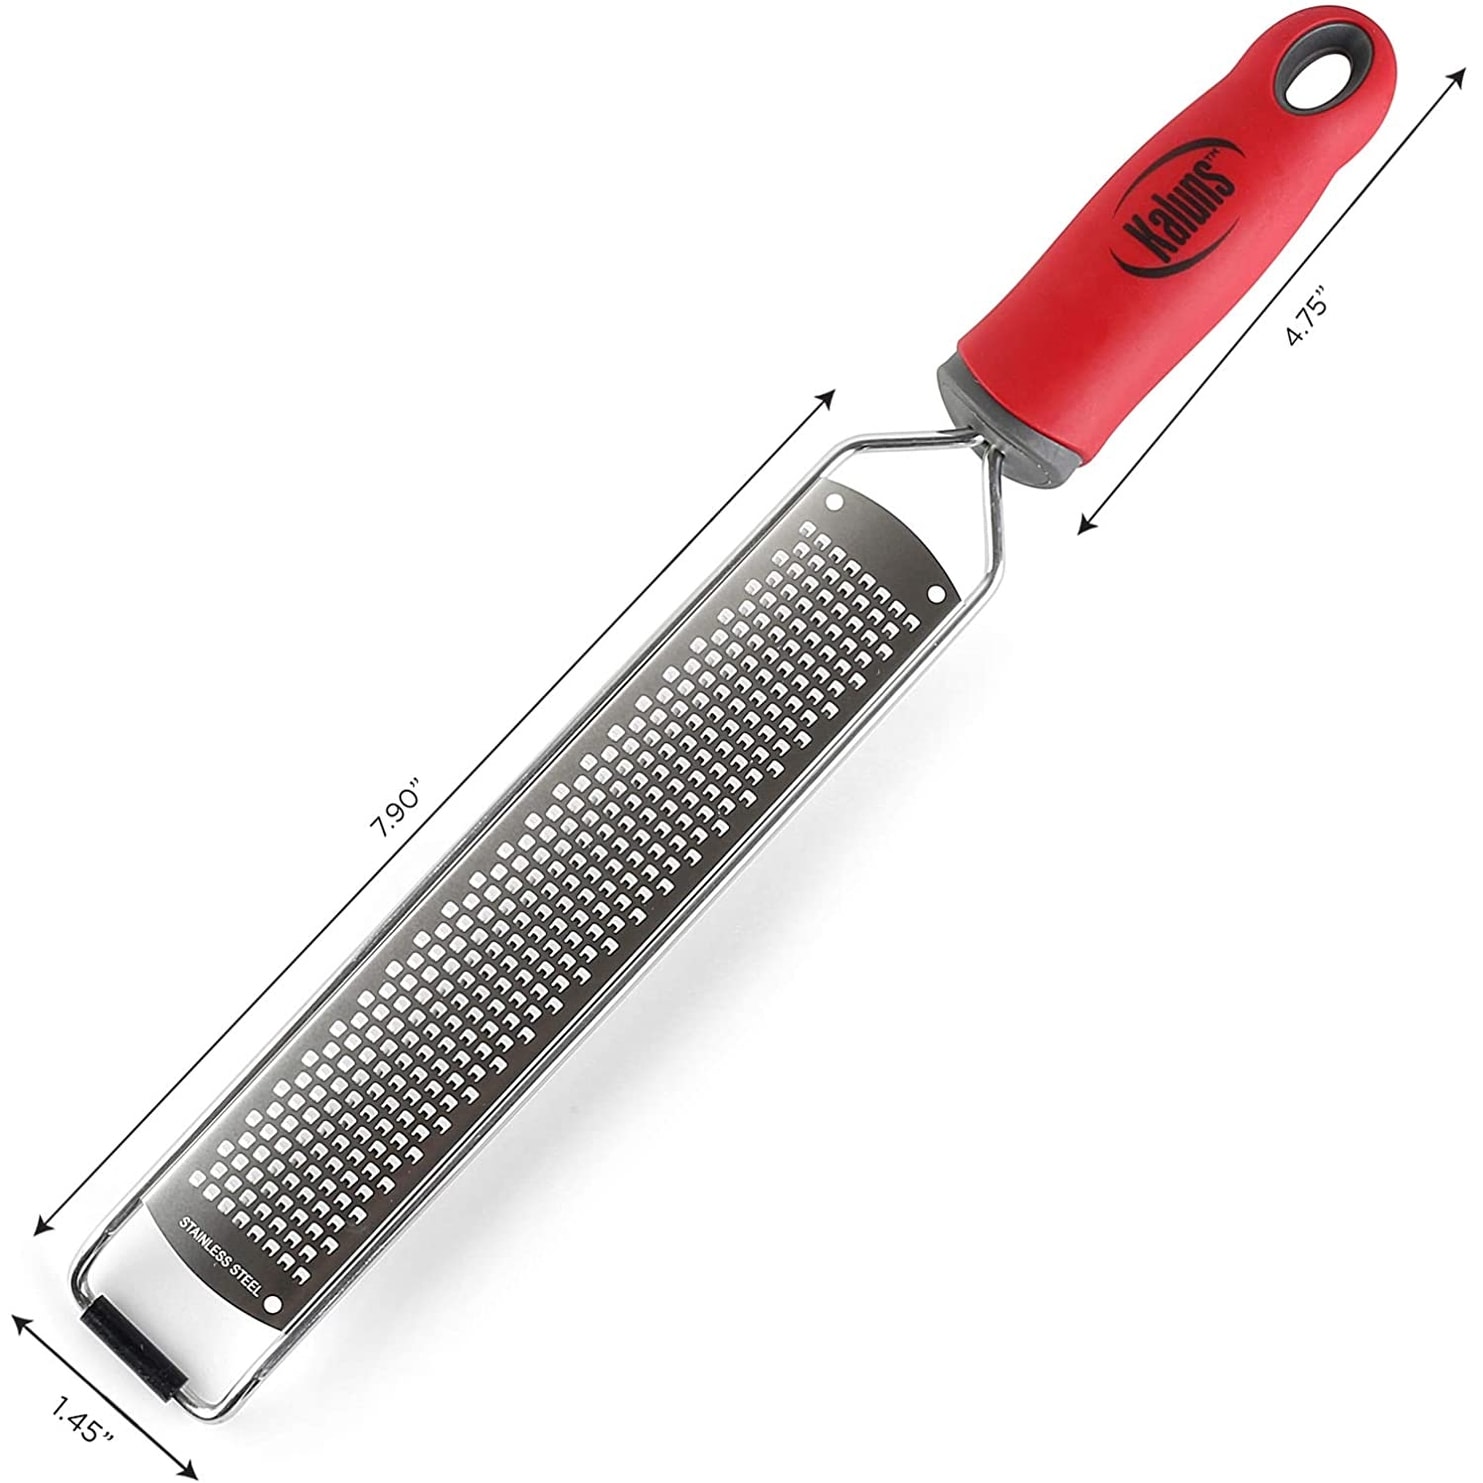 https://ak1.ostkcdn.com/images/products/is/images/direct/34c484b9a2efa416e520c8bf72d877cd52cd2d10/Citrus-Zester%2C-Cheese-Grater-With-Handle%2C-Lemon-Zester%2C-Razor-Sharp-Stainless-Steel-Blade%2C-Chocolate%2C-Garlic%2C-Fruits%2C-Vegetables.jpg